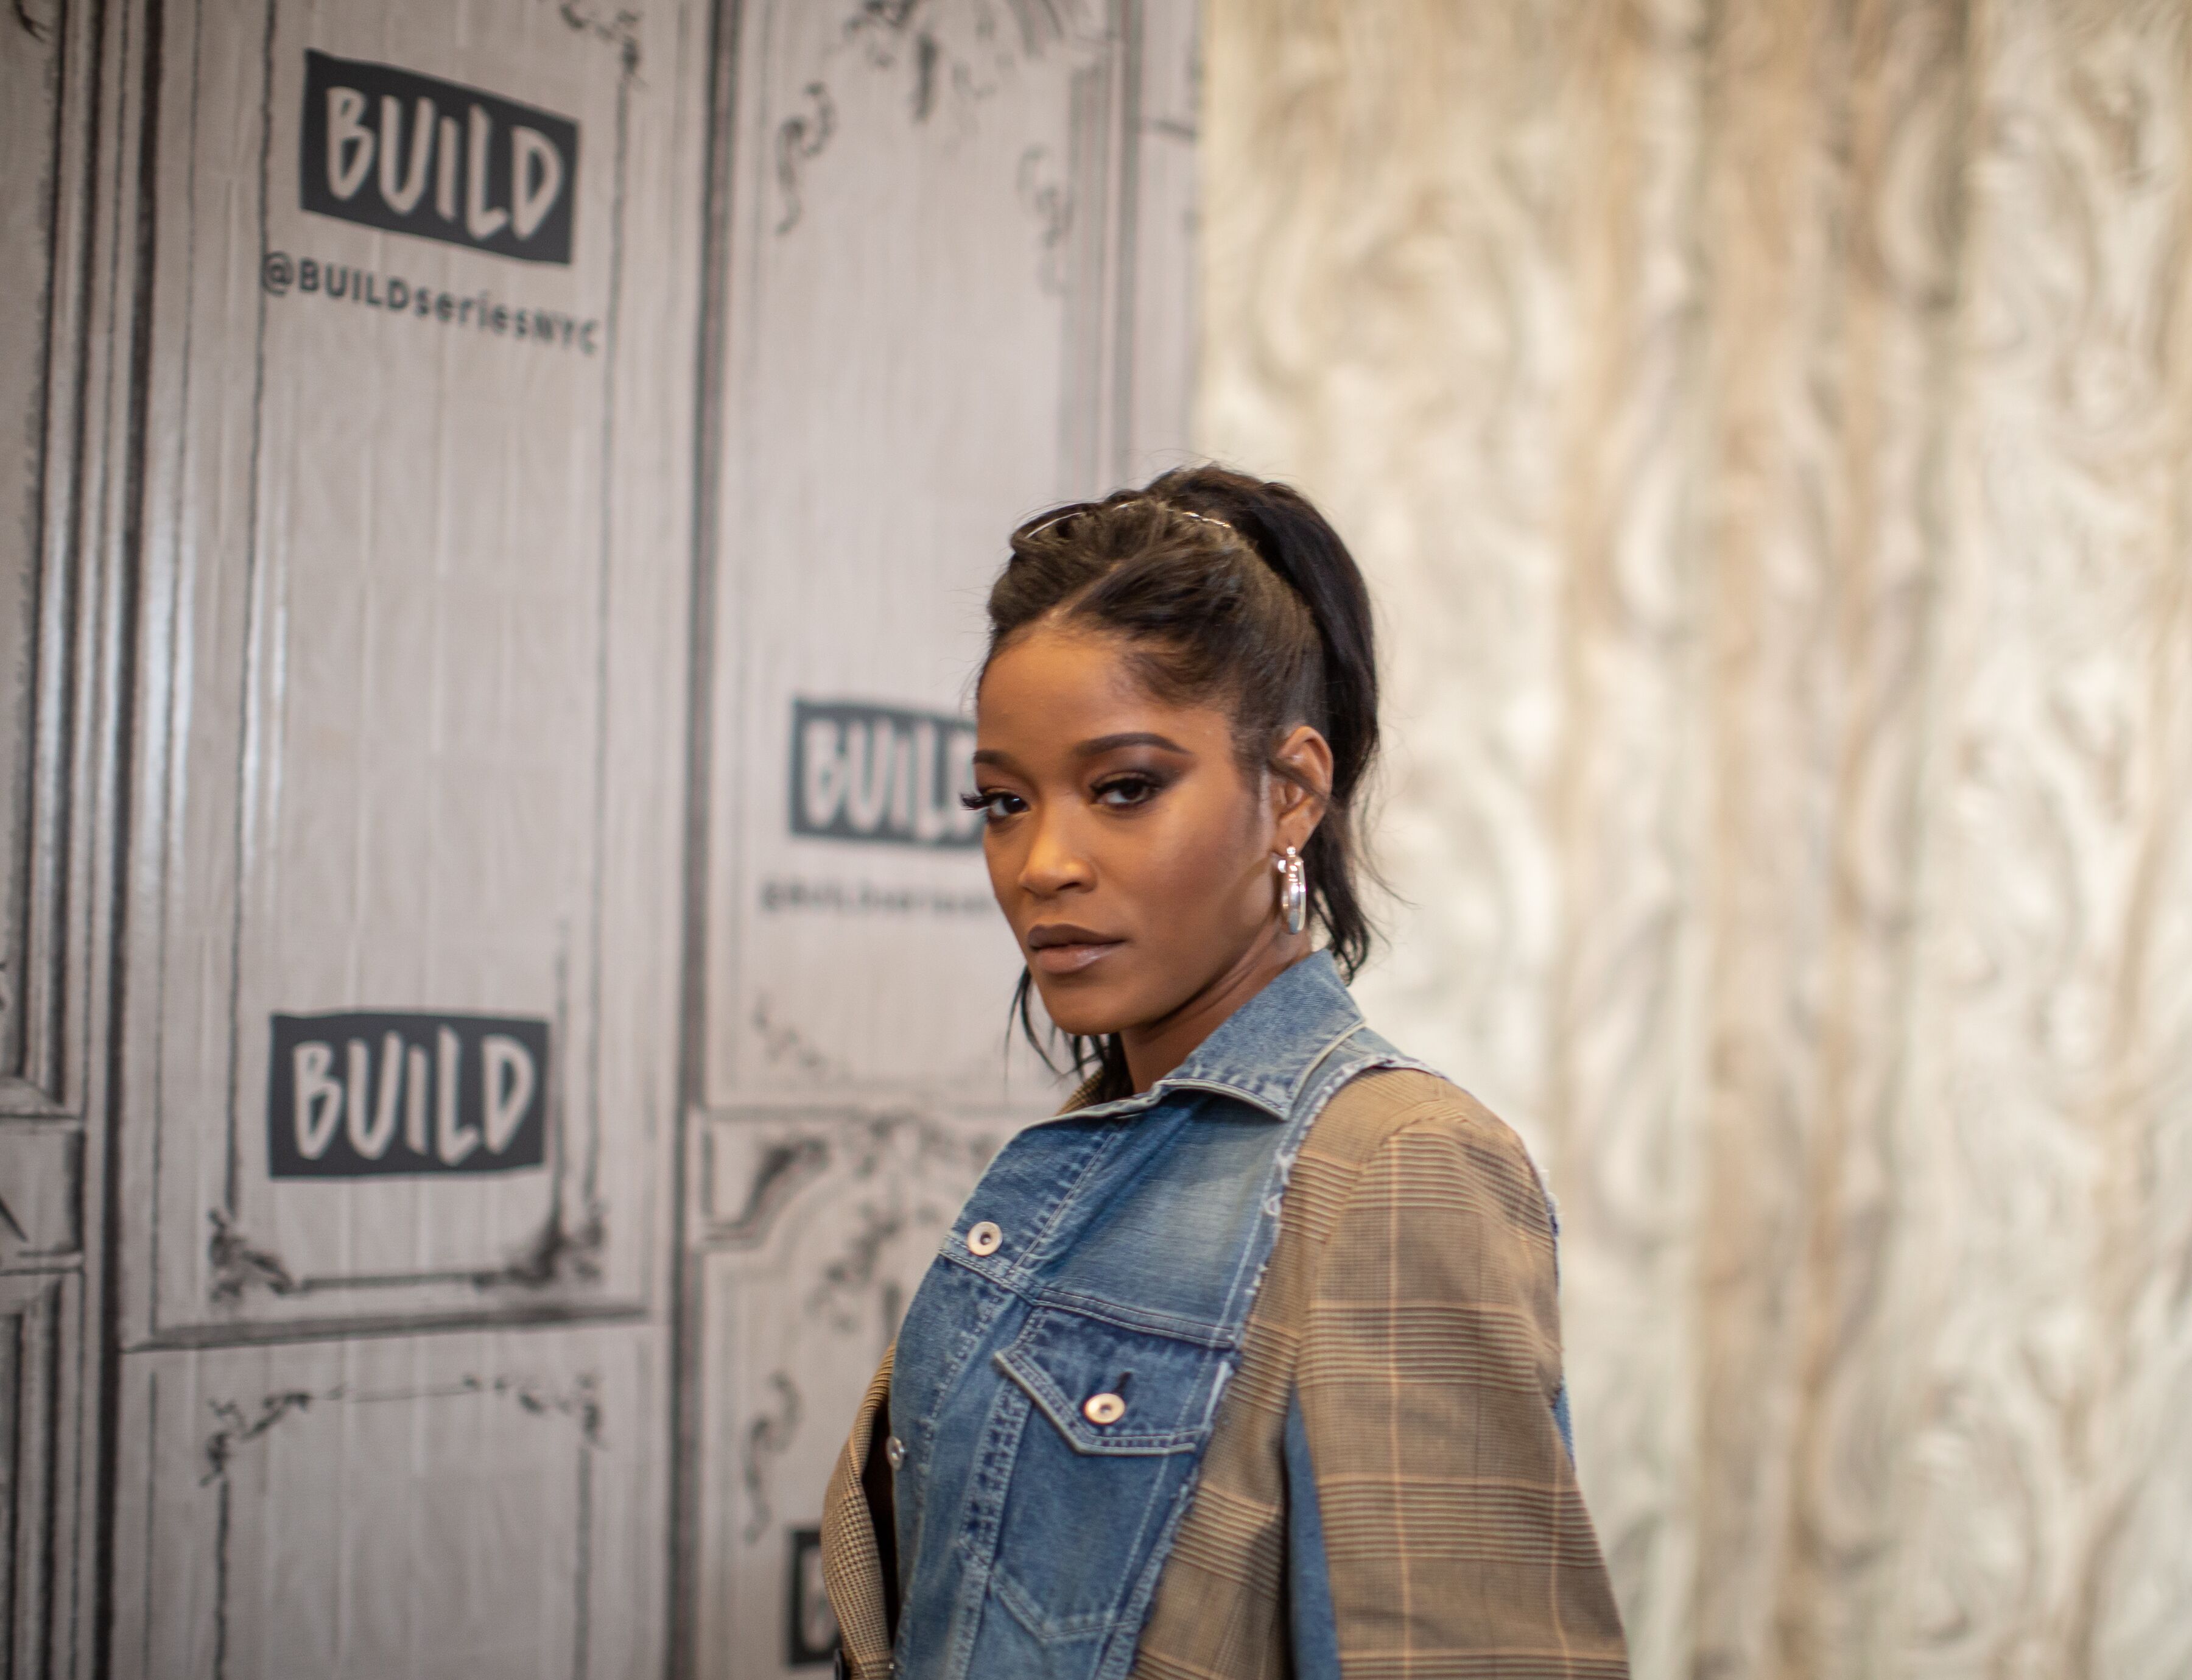 Keke Palmer at the BUILD event in New York City | Source: Getty Images/GlobalImagesUkraine